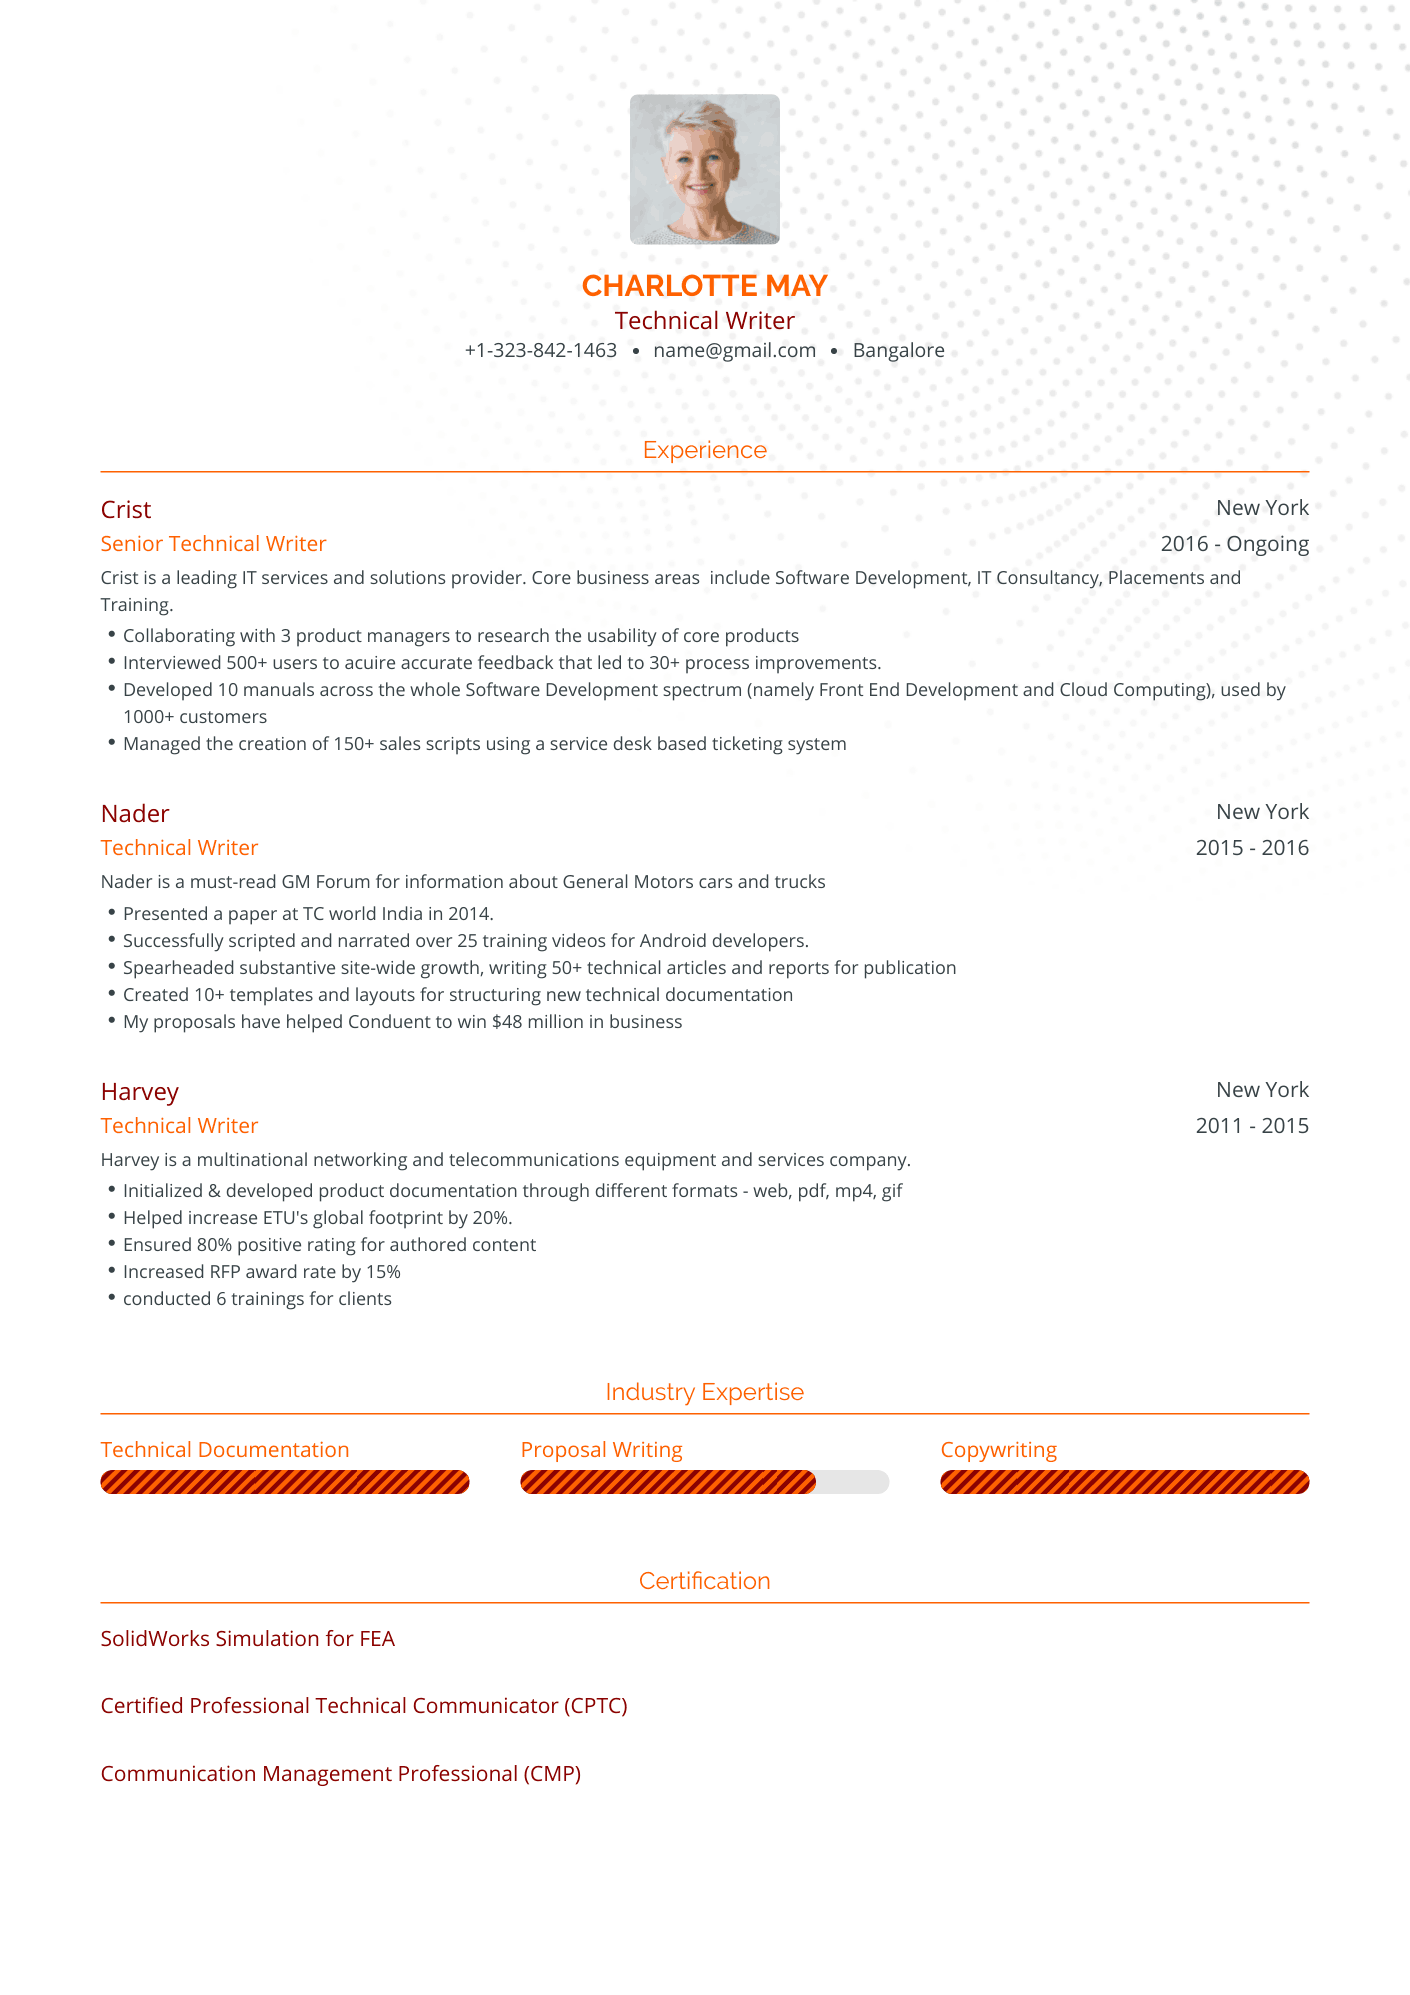 Traditional Technical Writer Resume Template